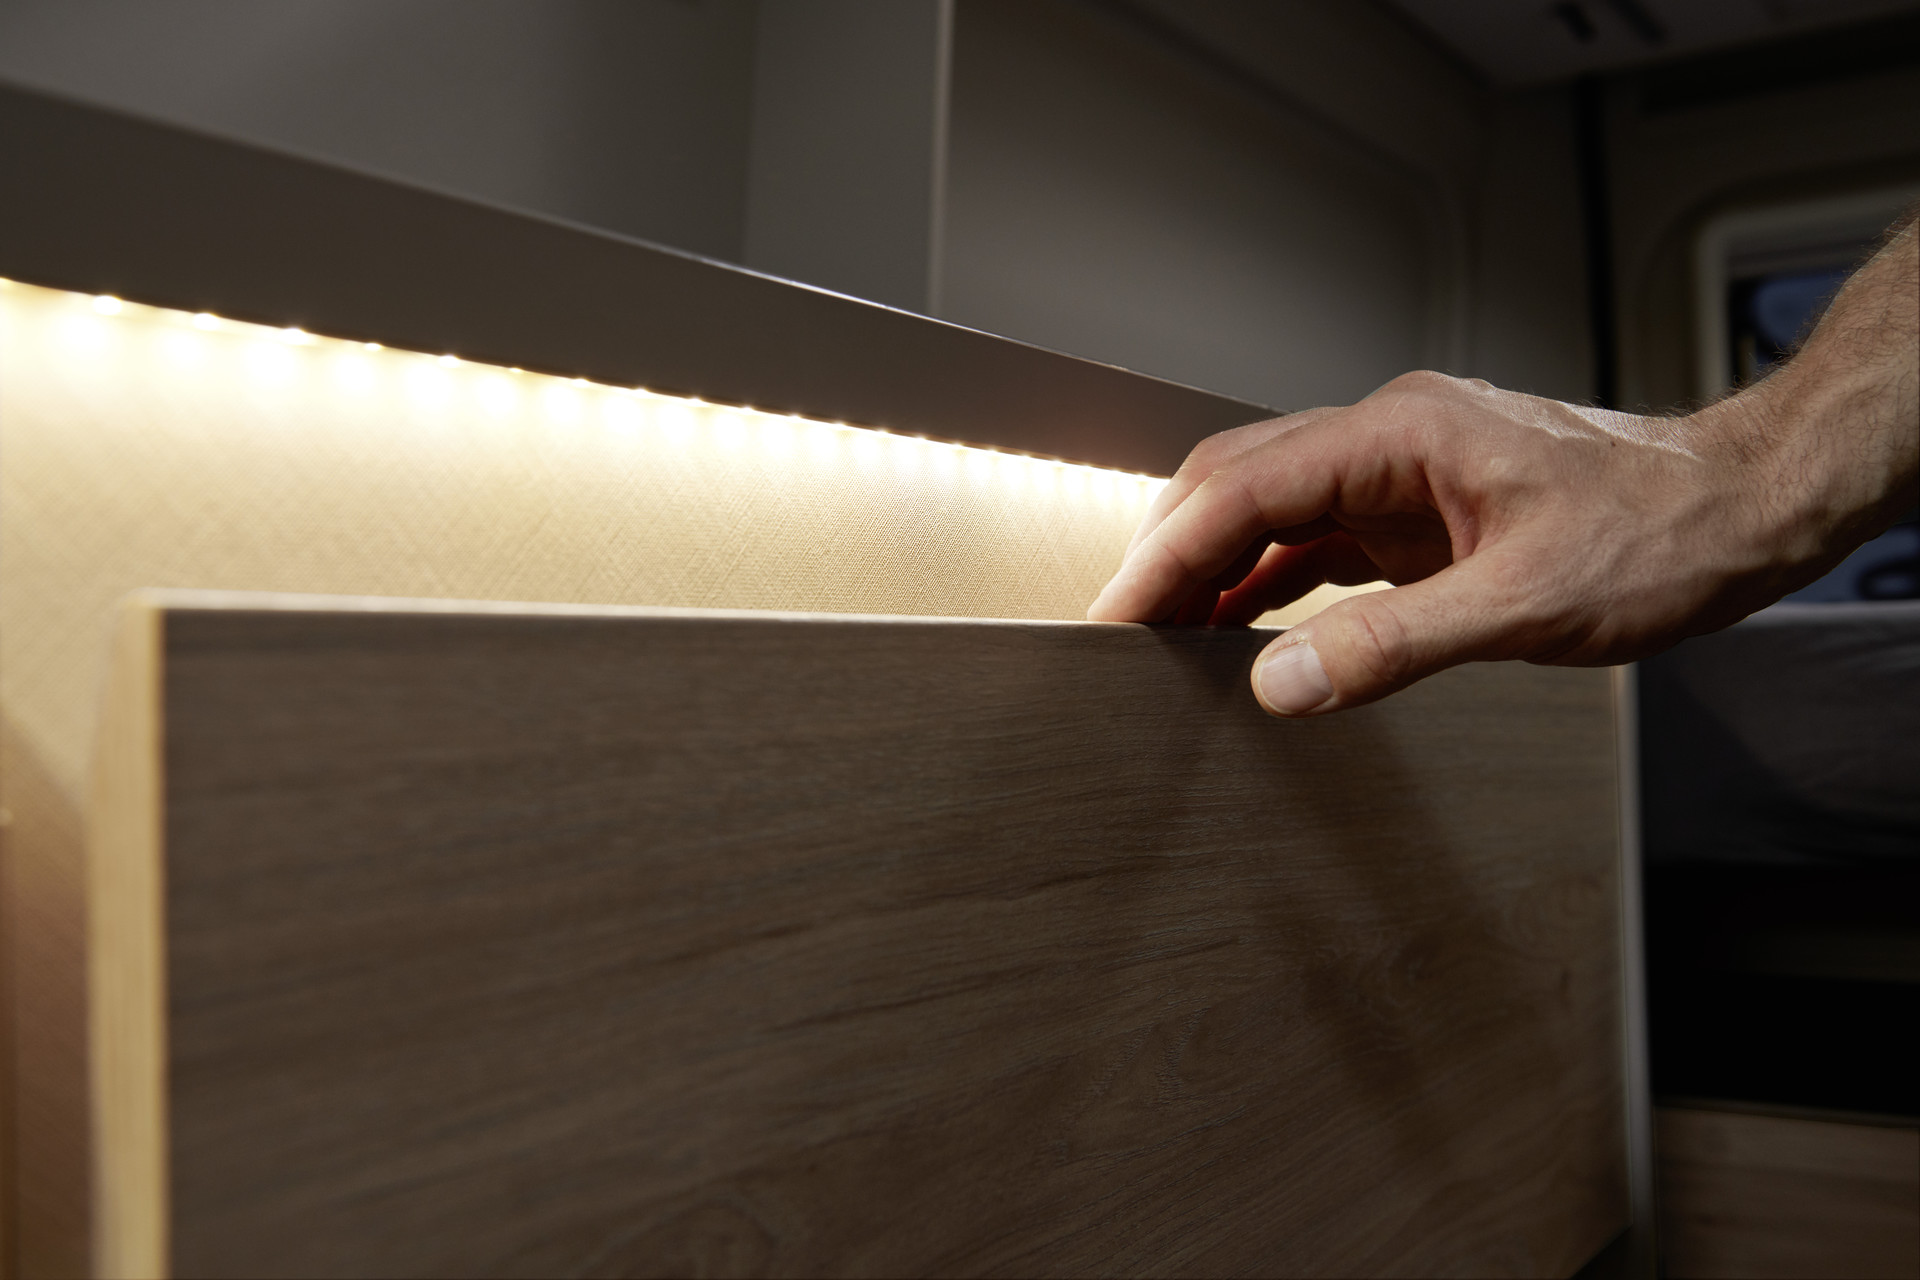 Ambient lighting inside the drawer illuminates the contents and creates a warm ambience